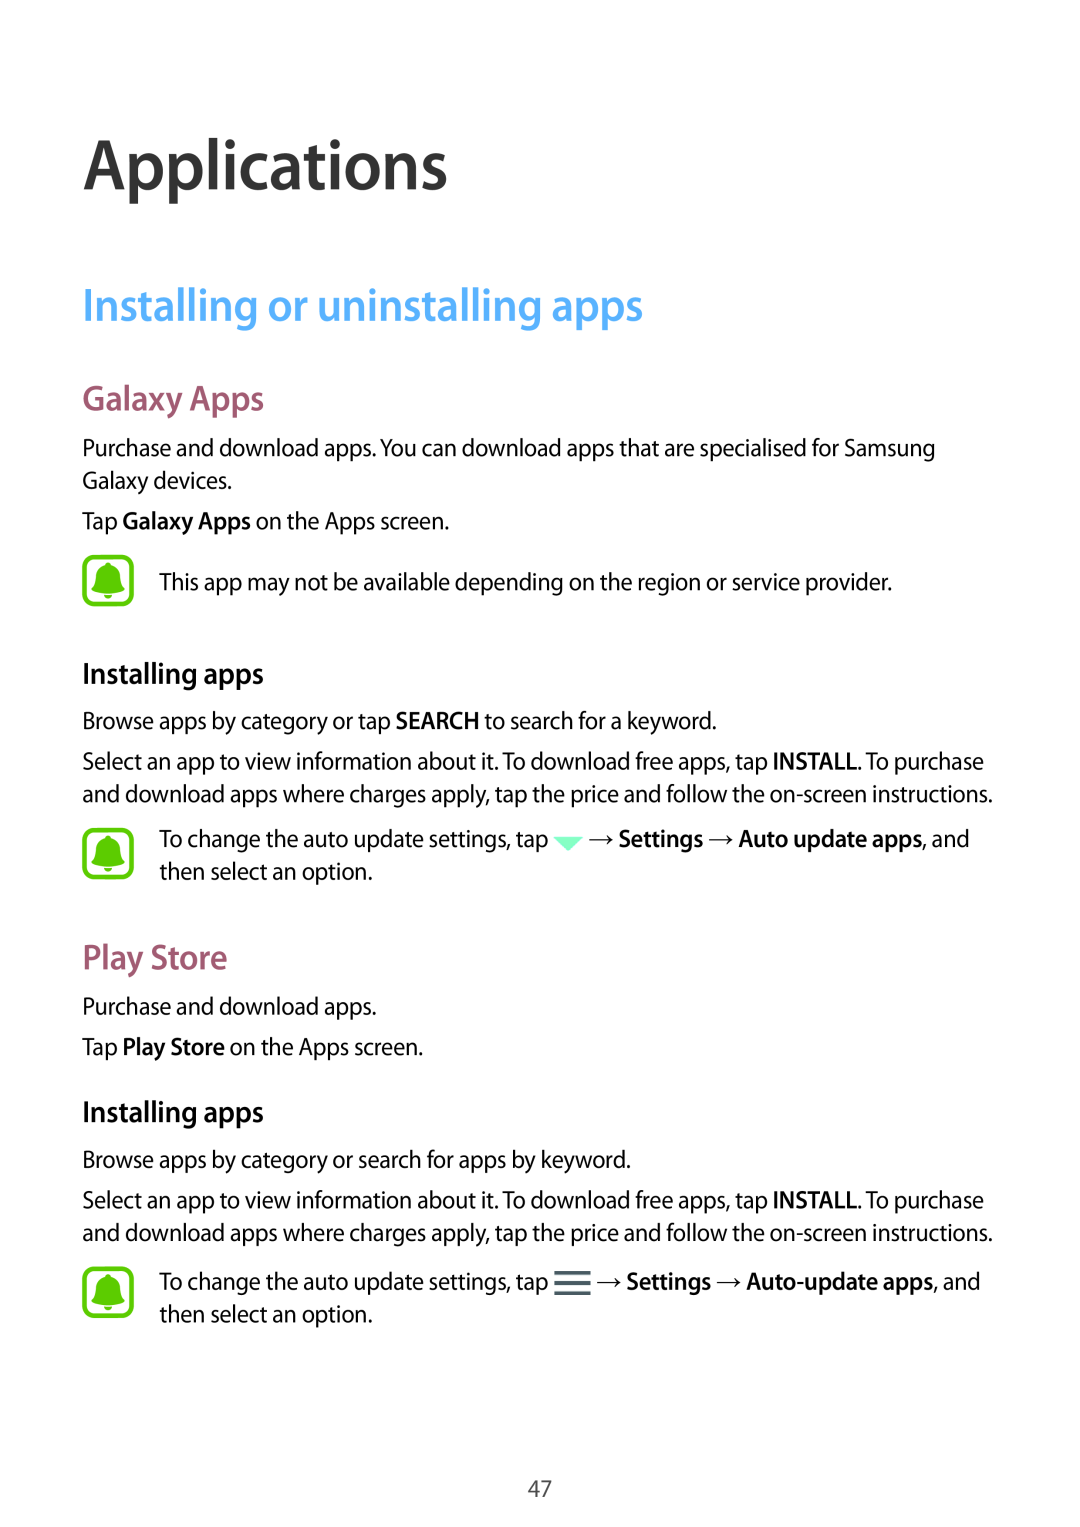 Samsung SM-T719NZWESER manual Applications, Installing or uninstalling apps, Galaxy Apps, Play Store, Installing apps 